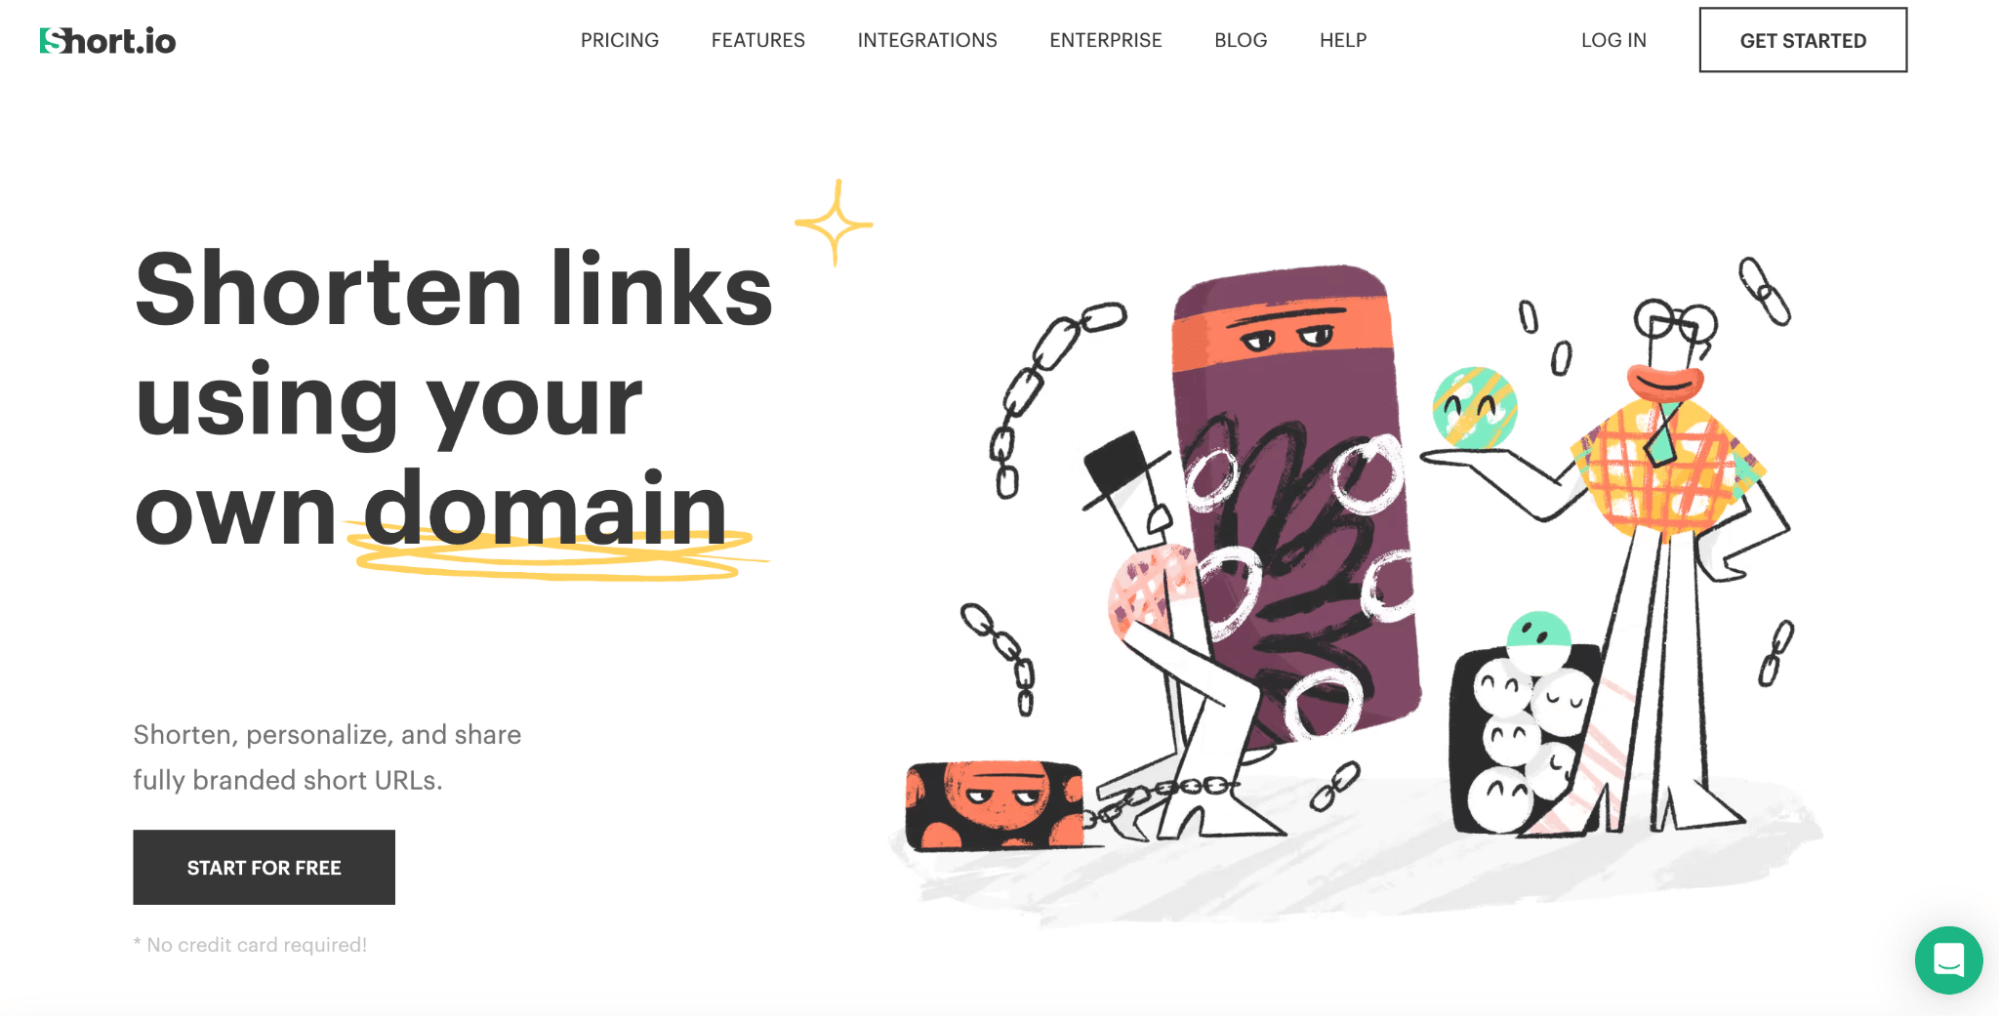 The image shows the homepage for Short.io with a heading, “Shorten links using your own domain”. Off to the side is a graphic with various animated characters demonstrating the effectiveness of the link tracking software.